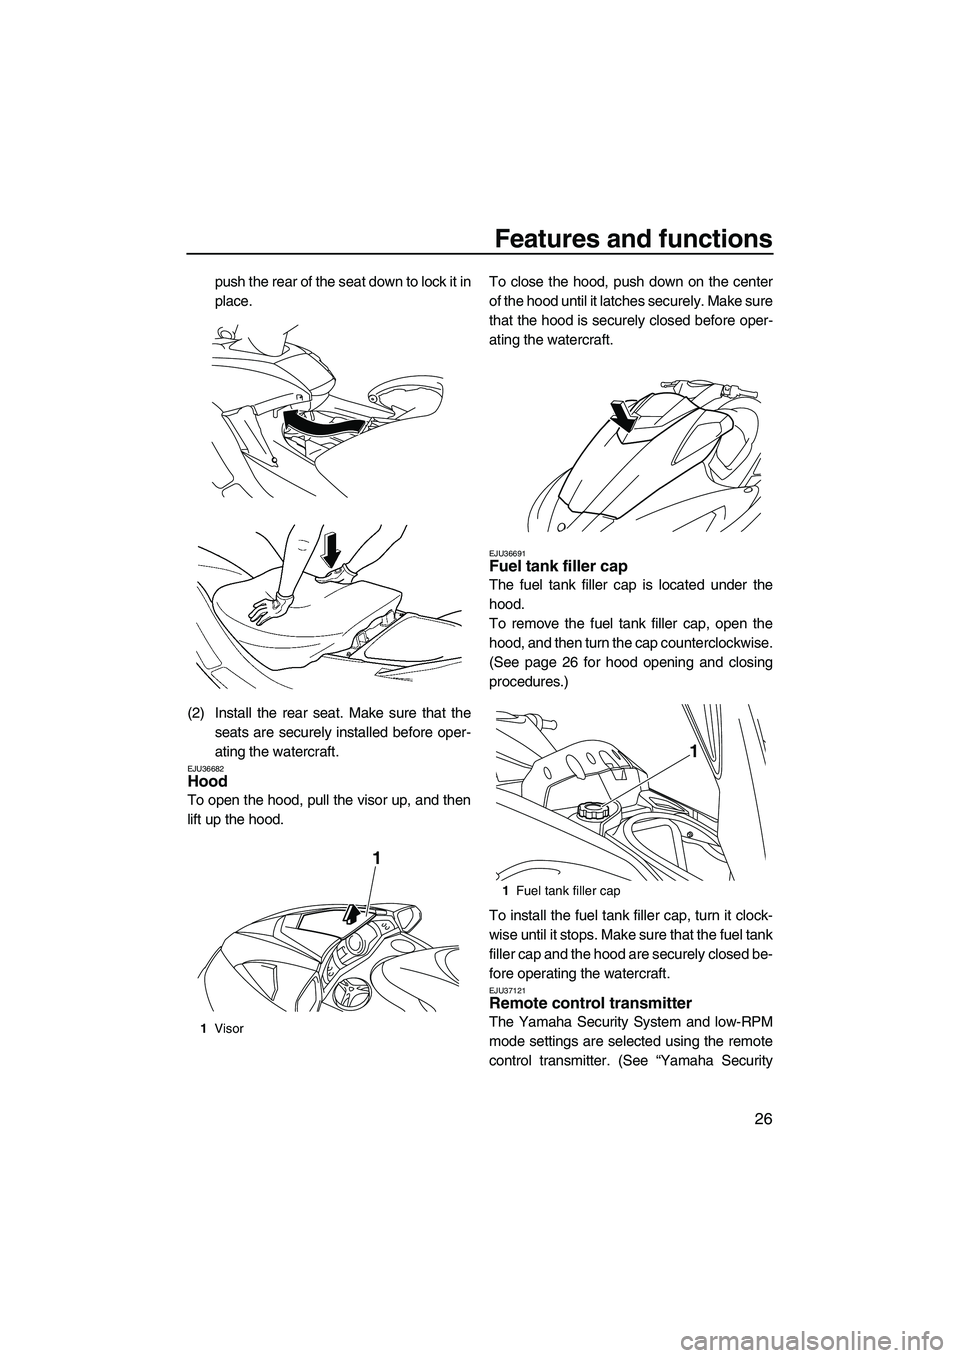 YAMAHA SVHO 2009  Owners Manual Features and functions
26
push the rear of the seat down to lock it in
place.
(2) Install the rear seat. Make sure that the
seats are securely installed before oper-
ating the watercraft.
EJU36682Hood